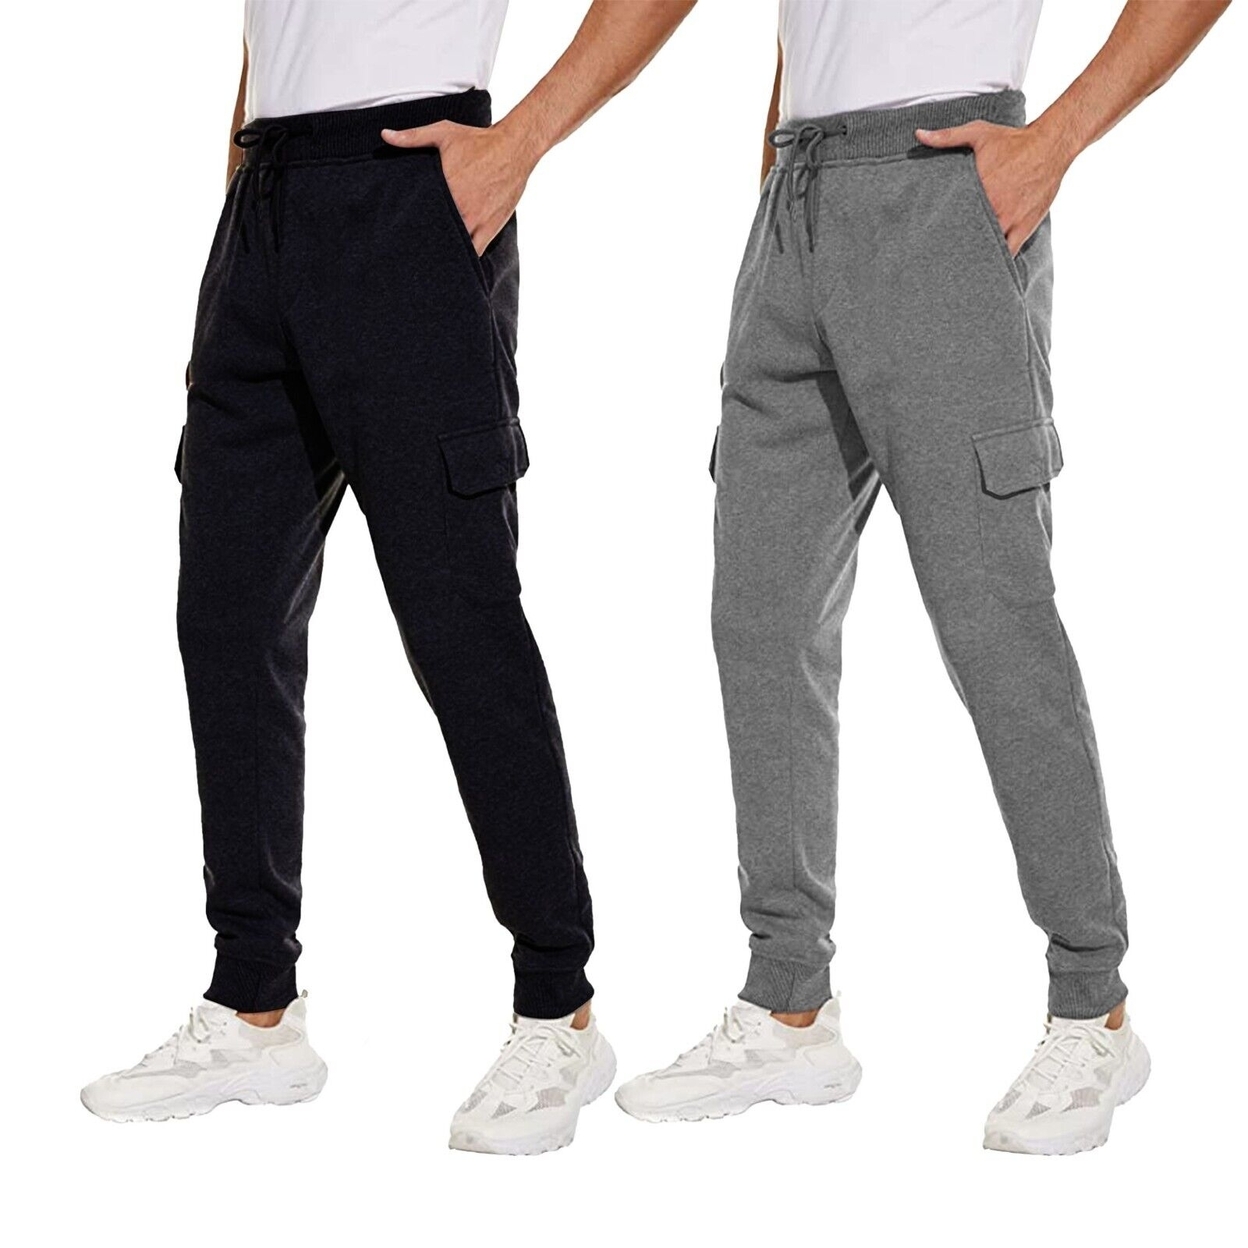 Multi-Pack Men's Ultra Soft Winter Warm Thick Athletic Sherpa Lined Jogger Pants - Assorted, 2, 3xl